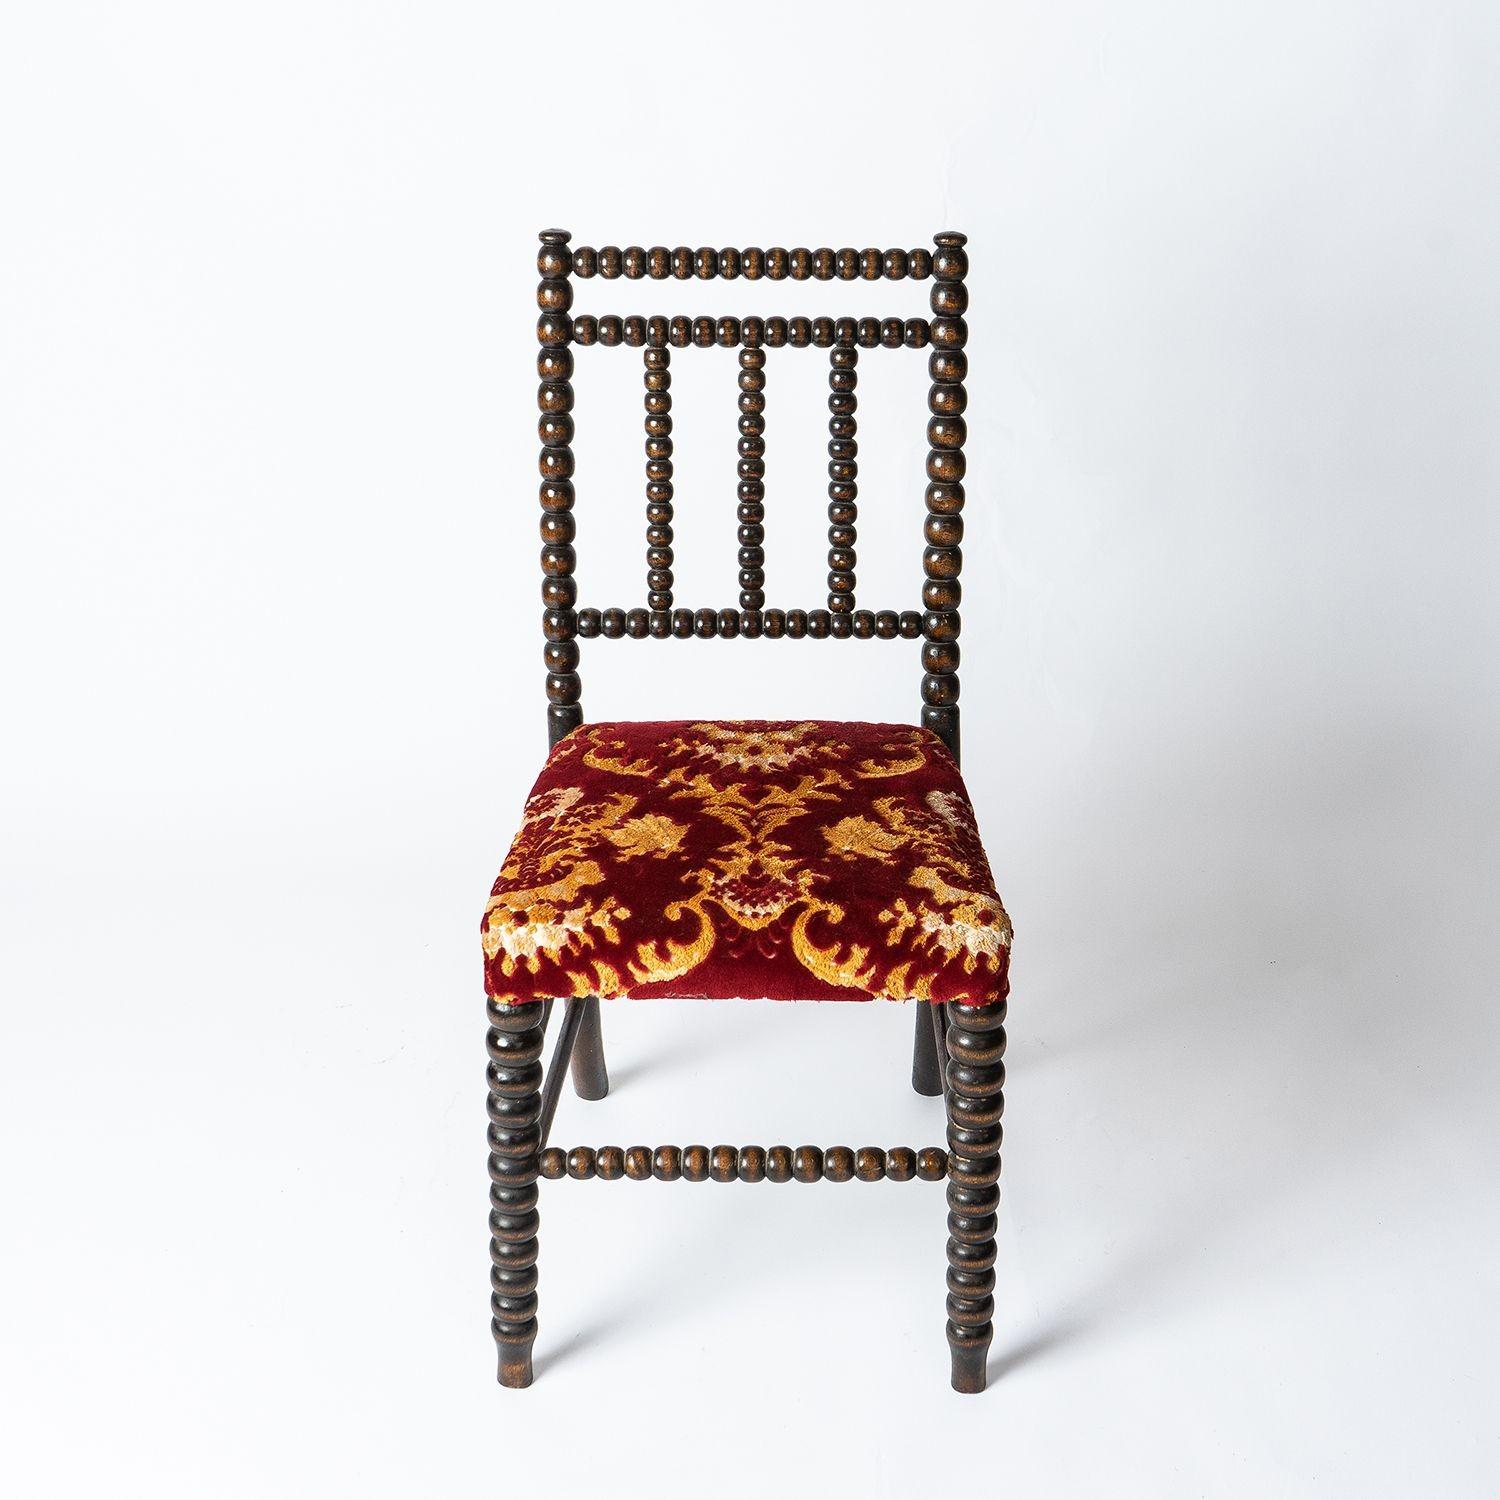 Wood Antique Bobbin Turned Chair with Red Velvet Upholstery, 19th Century